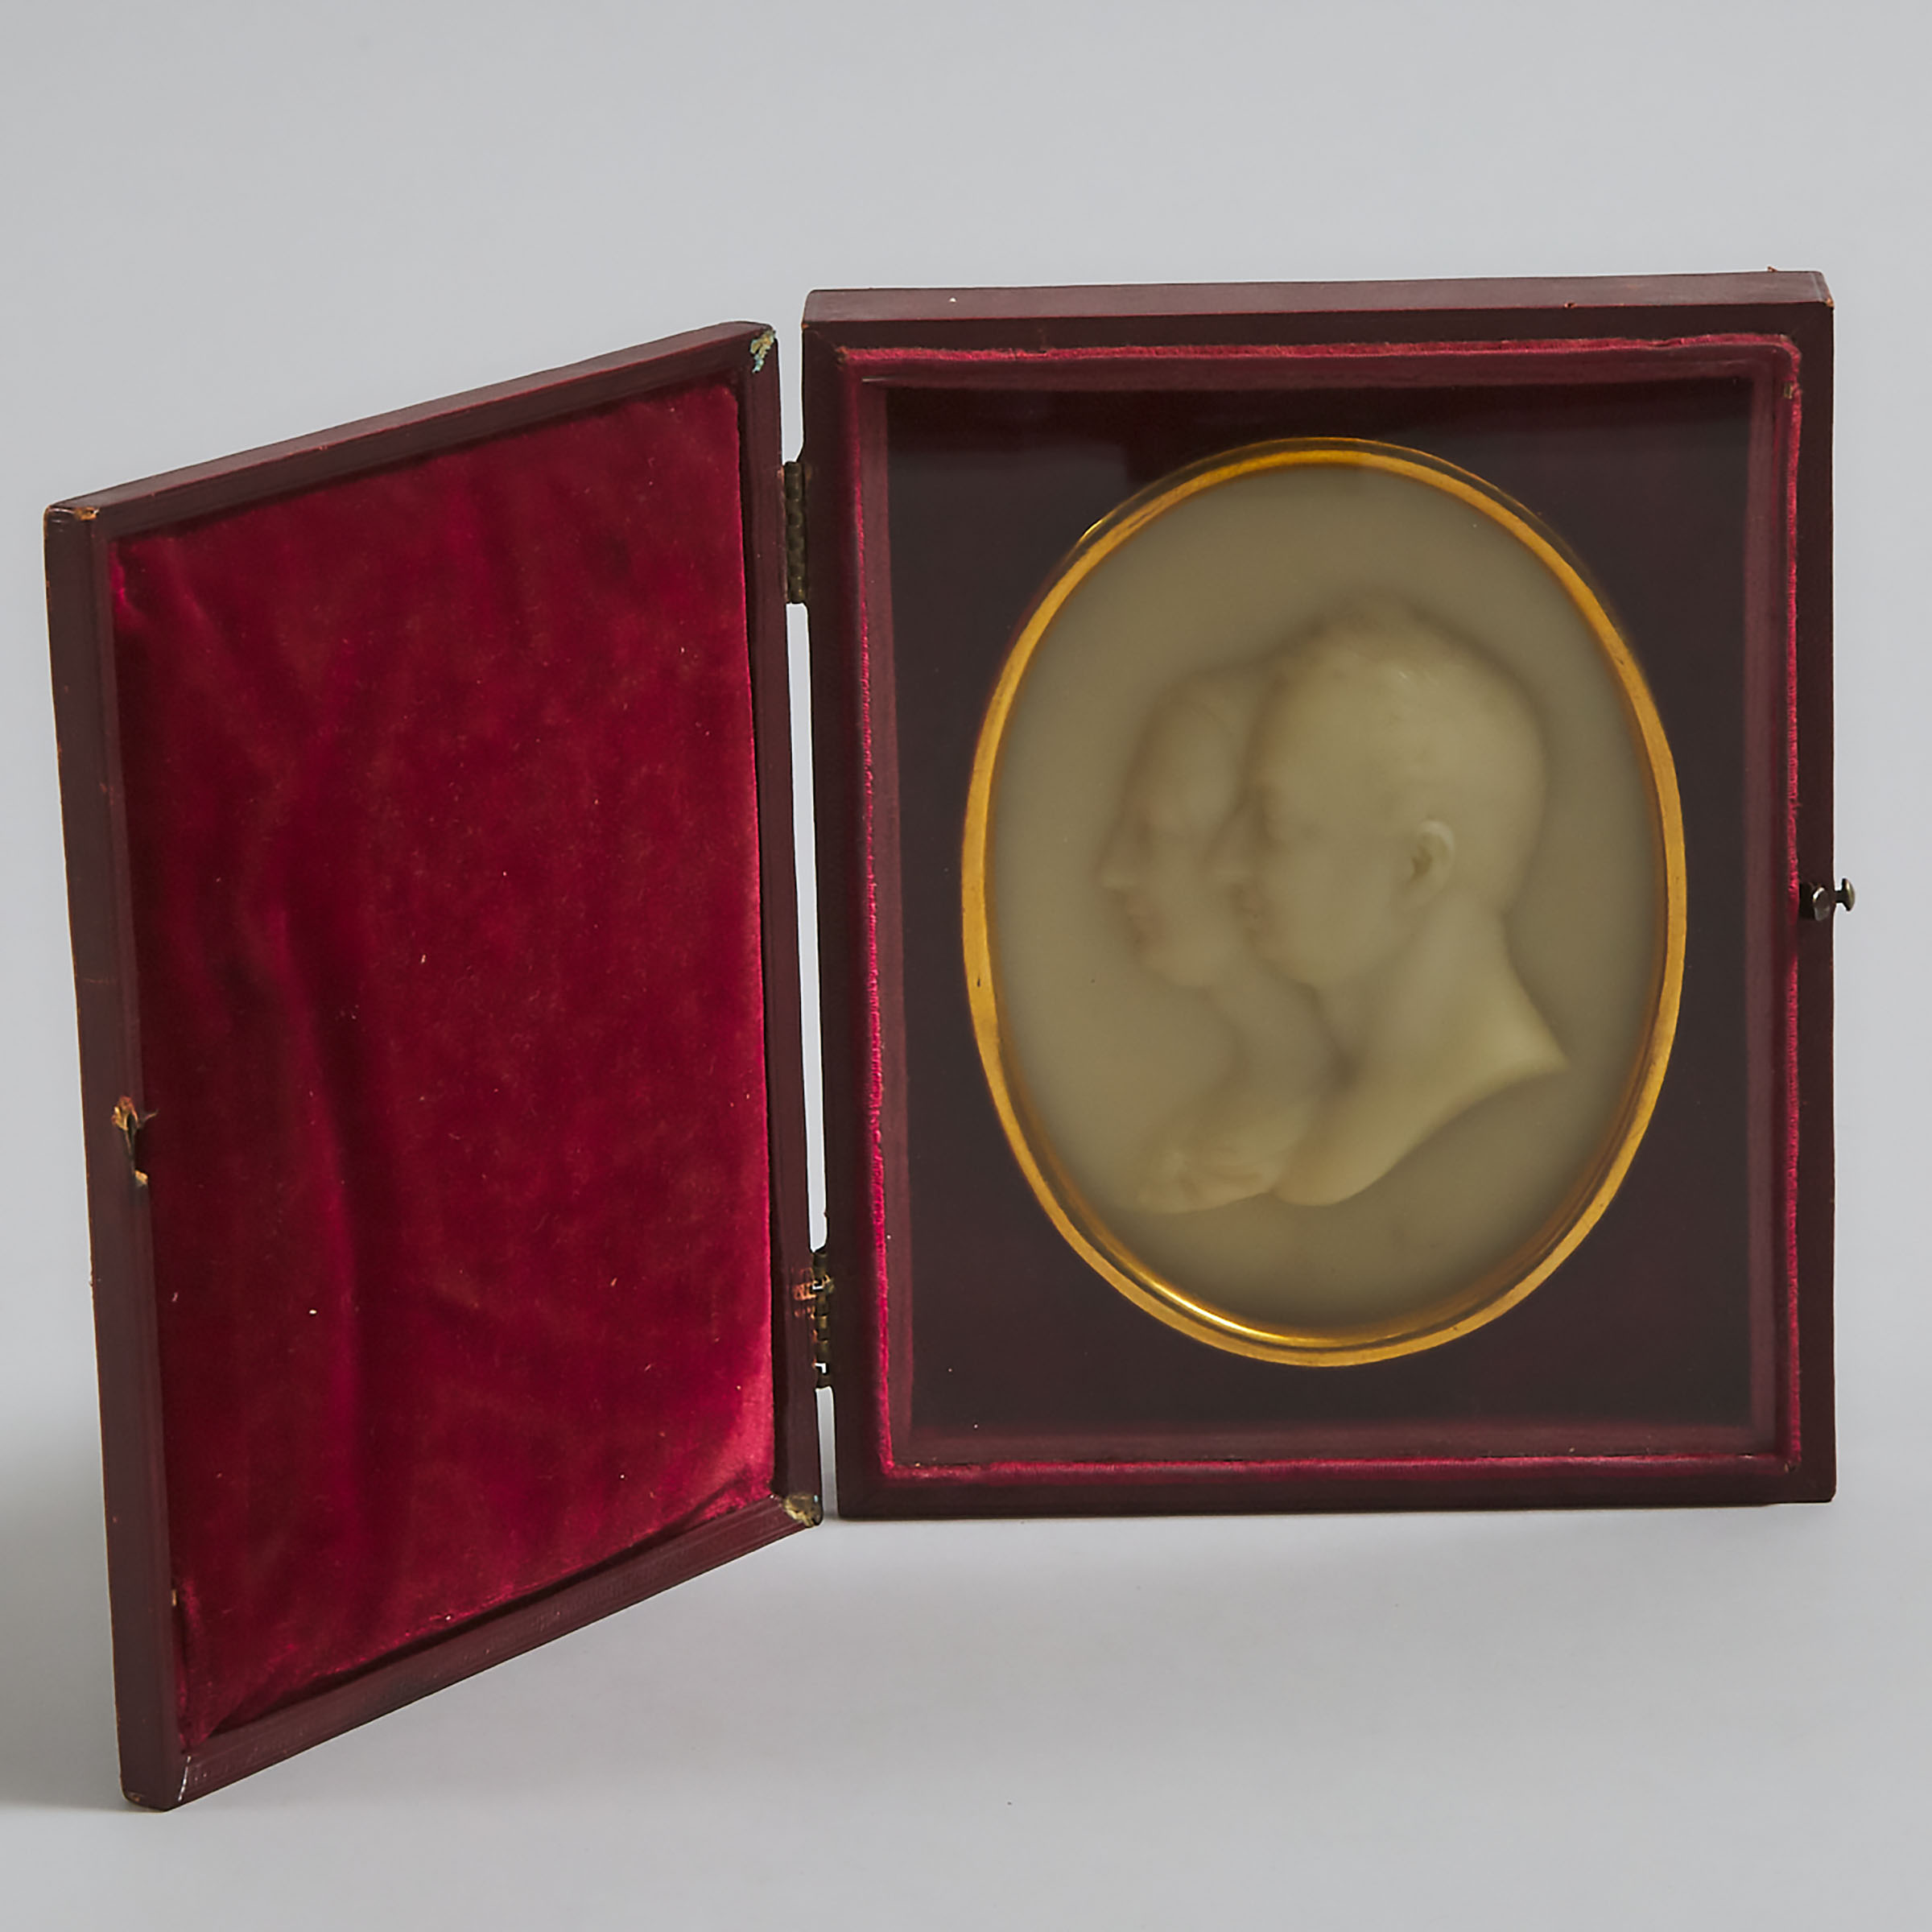 Cased Oval Wax Portrait Medallion of a William IV and Adelaide of Saxe-Meiningen, c.1830